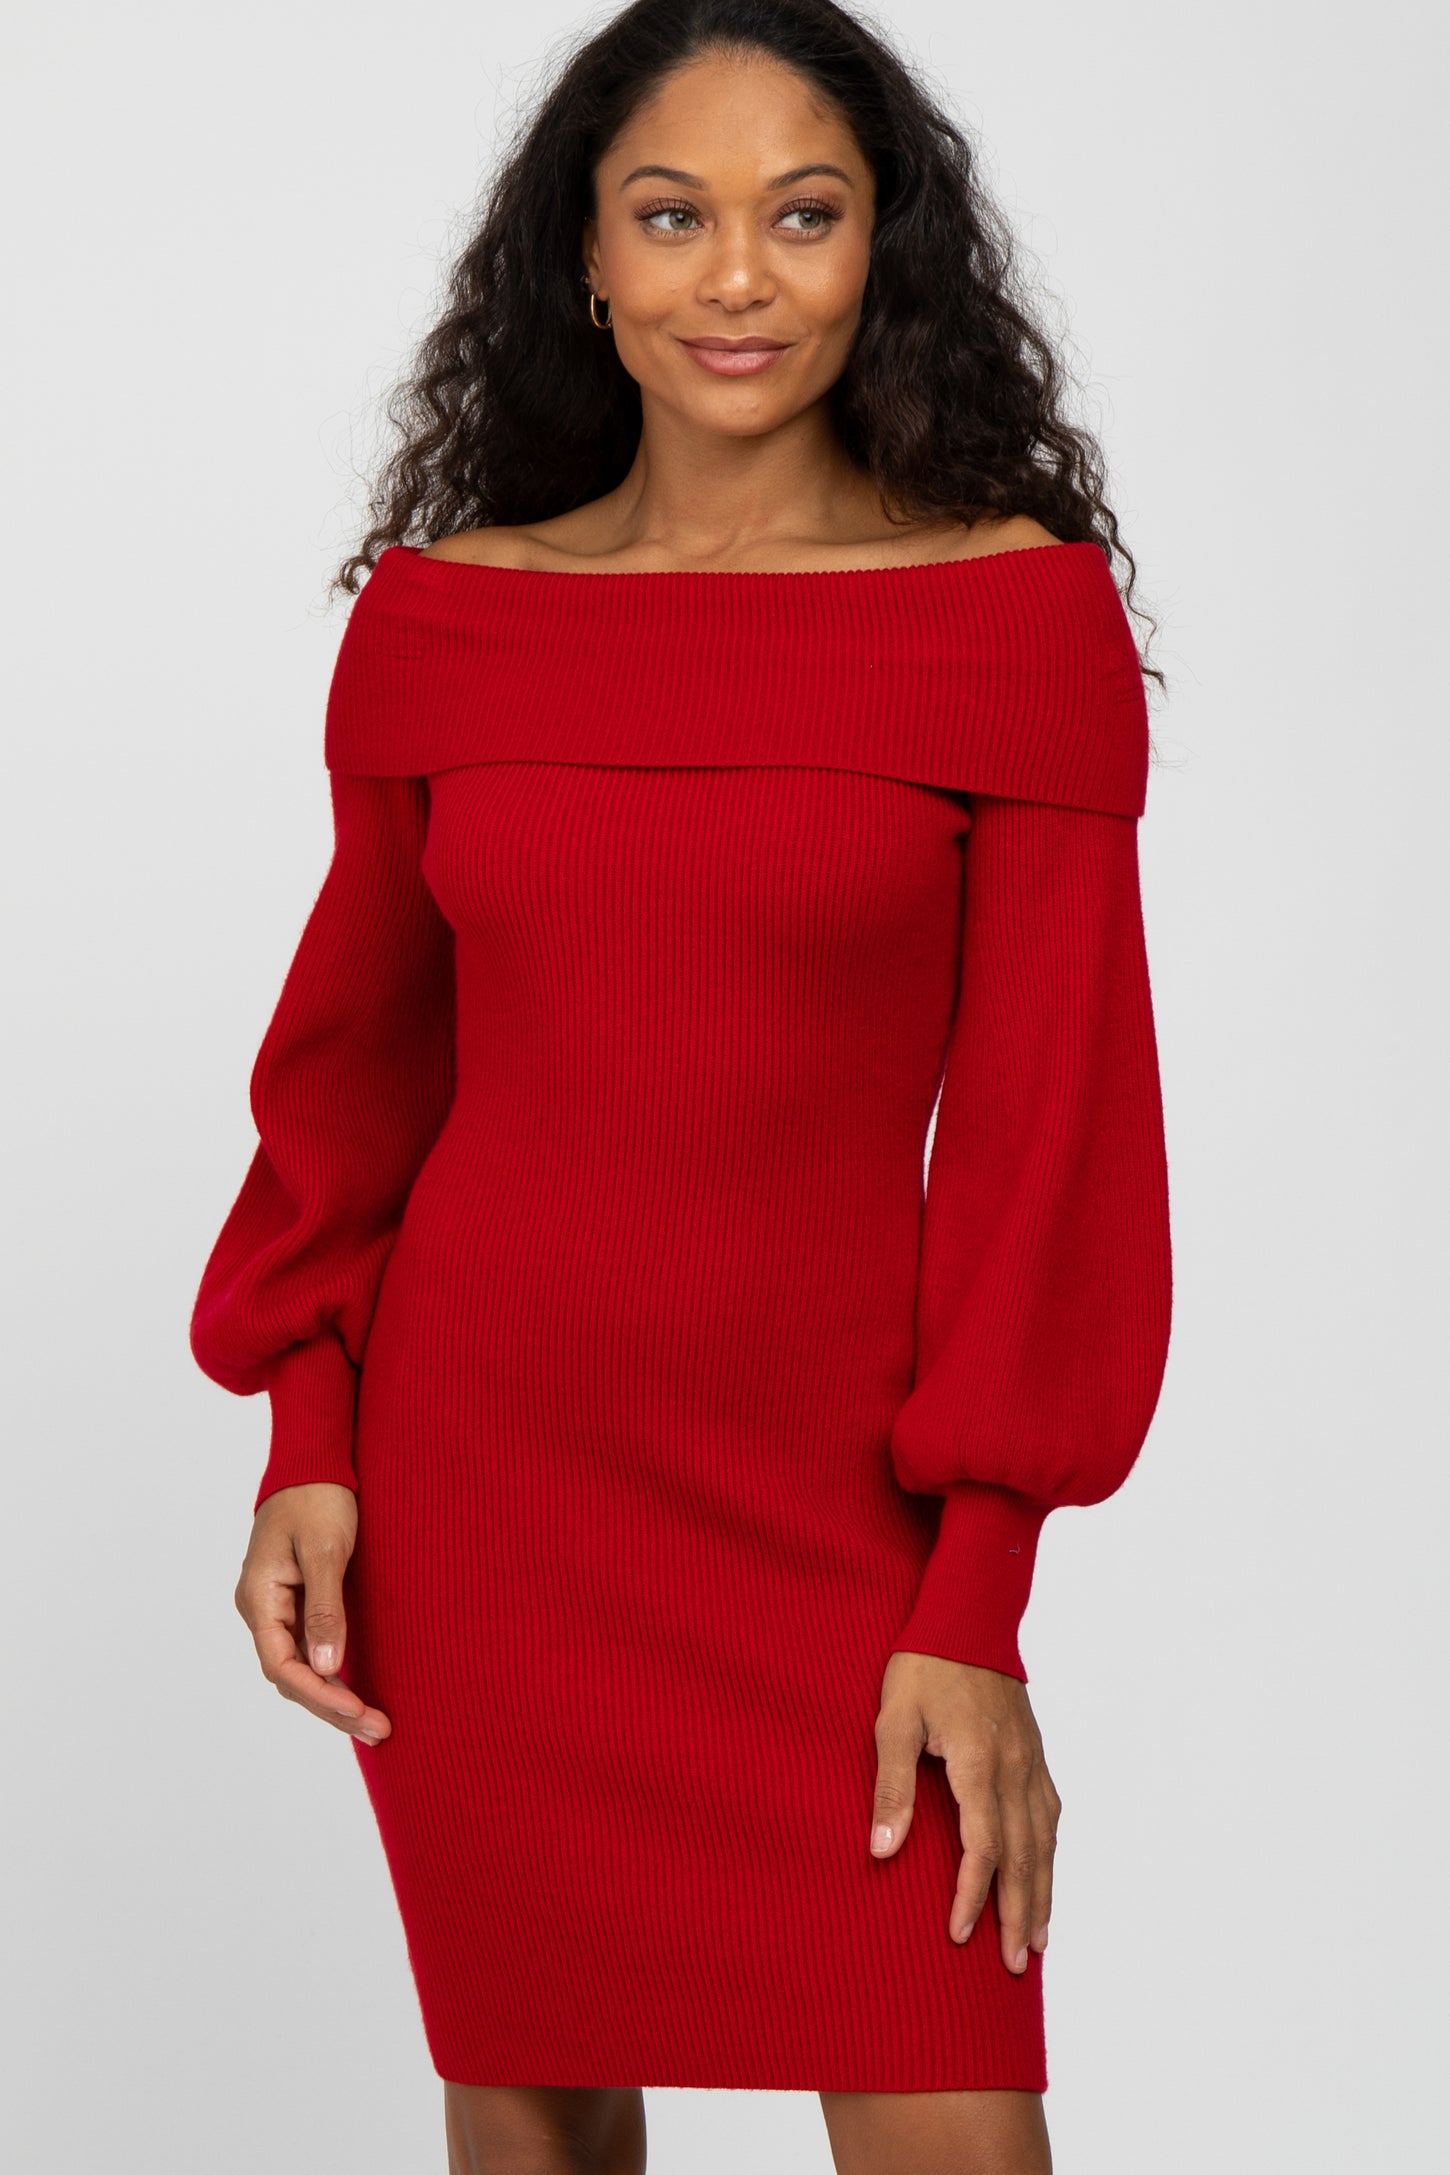 red sweater dresses